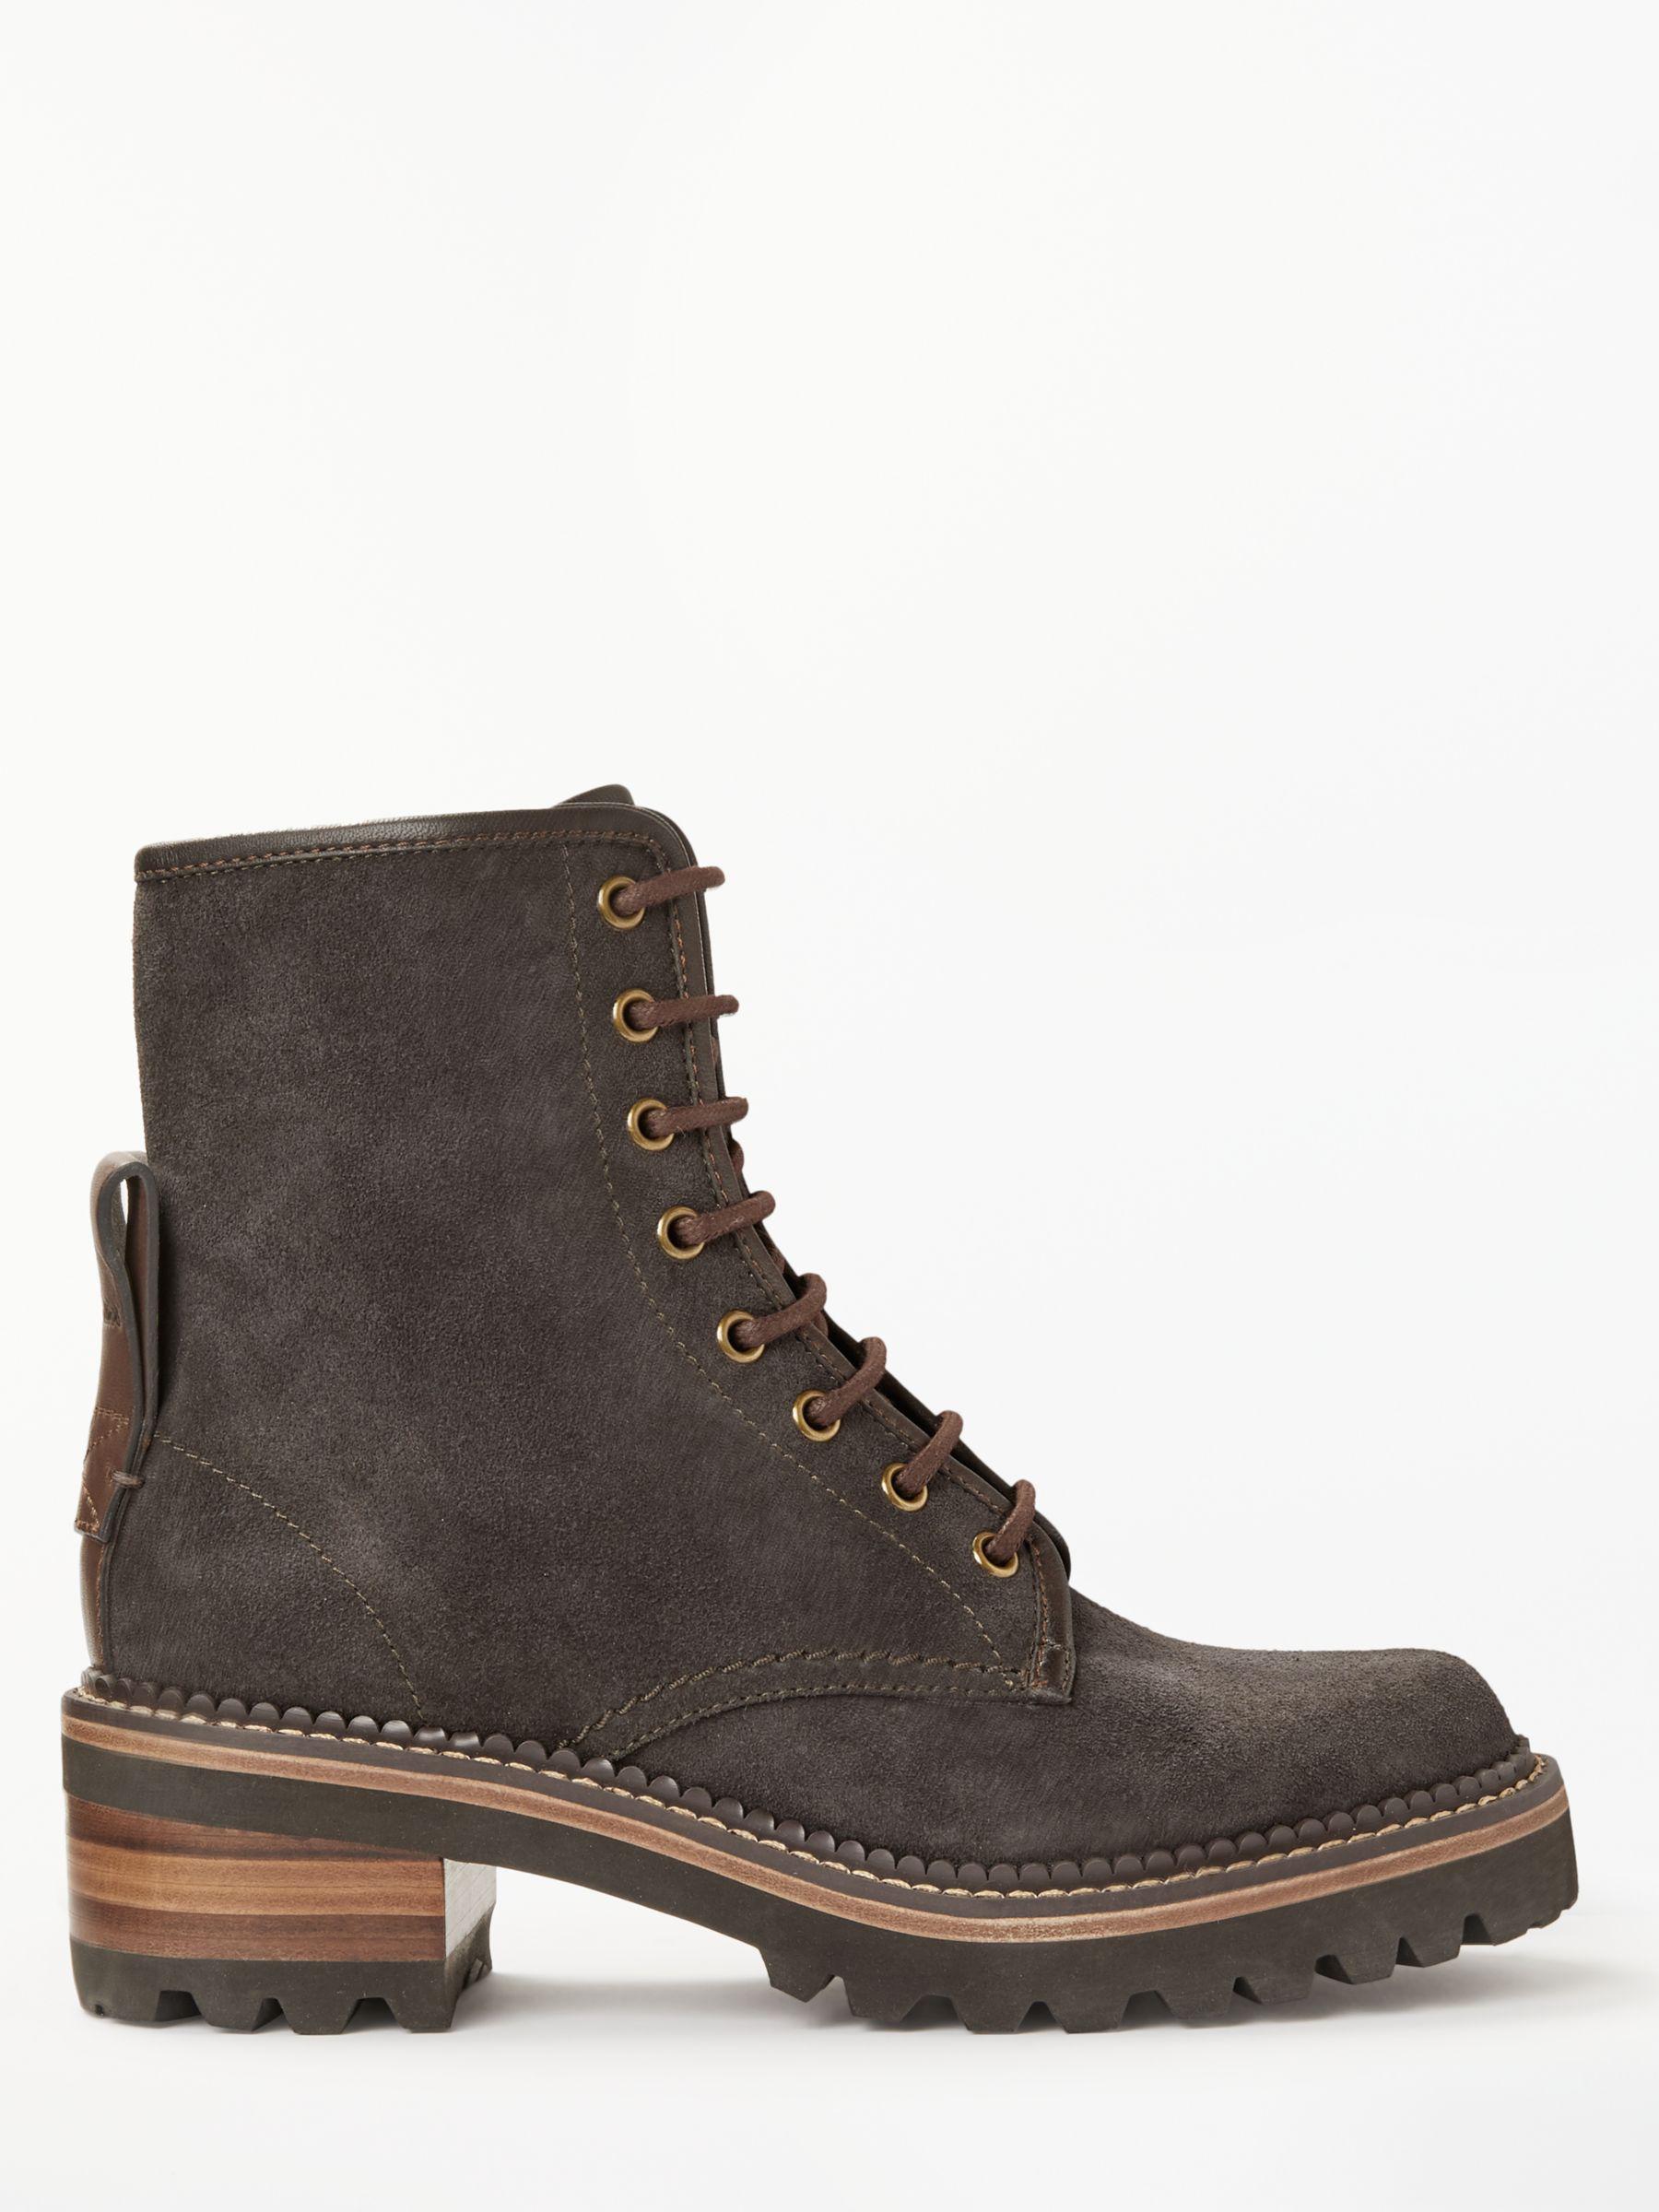 See By Chloé Mozart Suede Lace-up Ankle Boots in Dark Grey (Grey) - Lyst